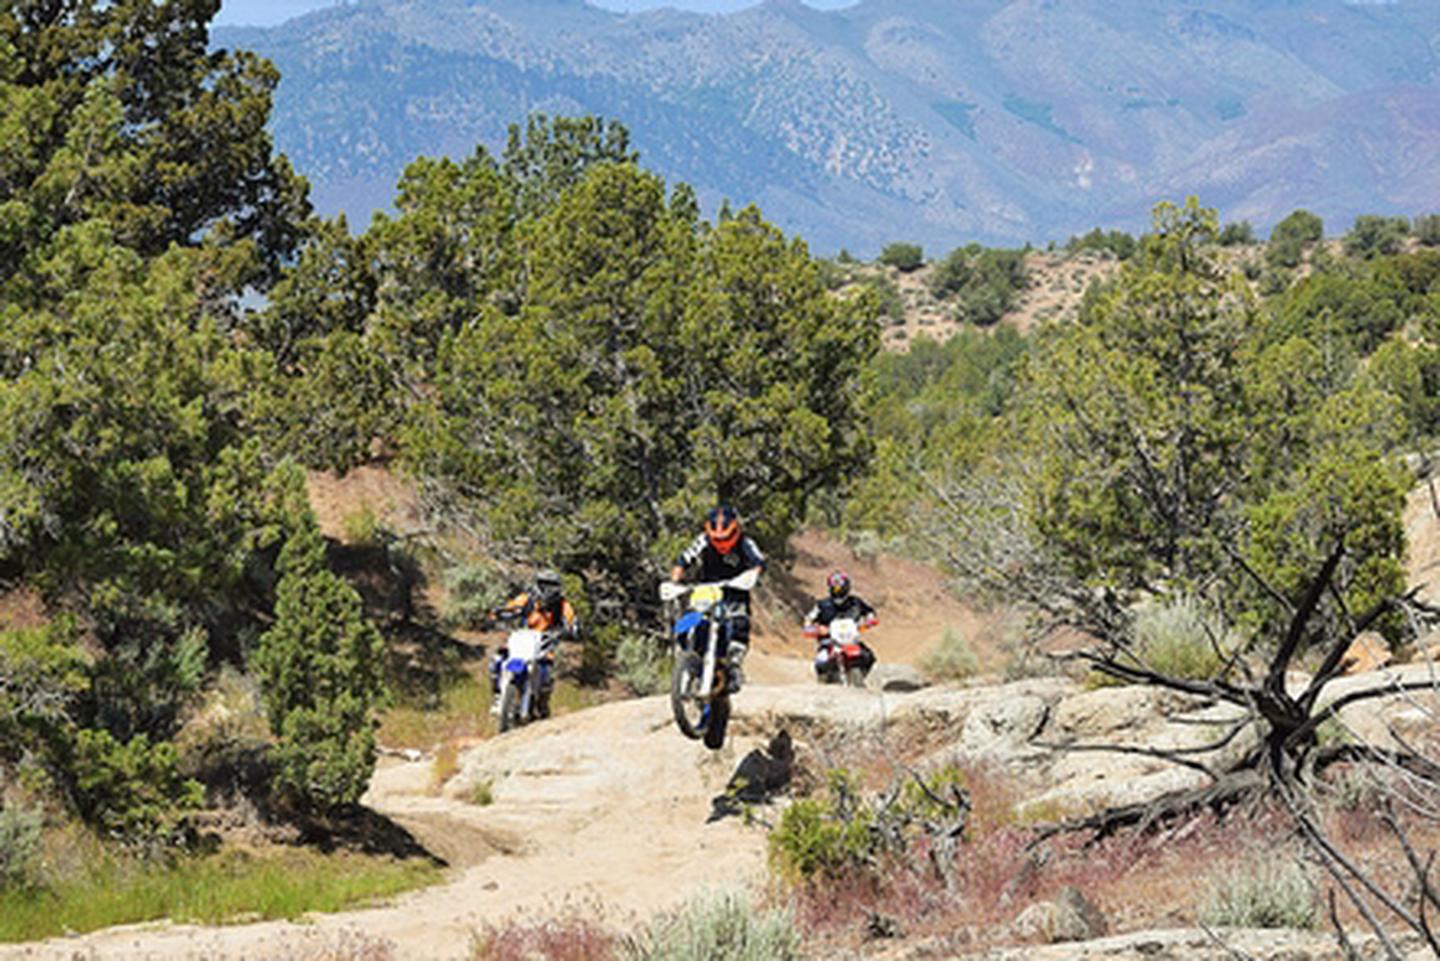 Fort Sage OHV Area Photo of Riders on Trail 15Riders at the Fort Sage OHV Area located outside of Doyle, Ca within Lassen County, the rider is on Trail 15 within the OHV area.